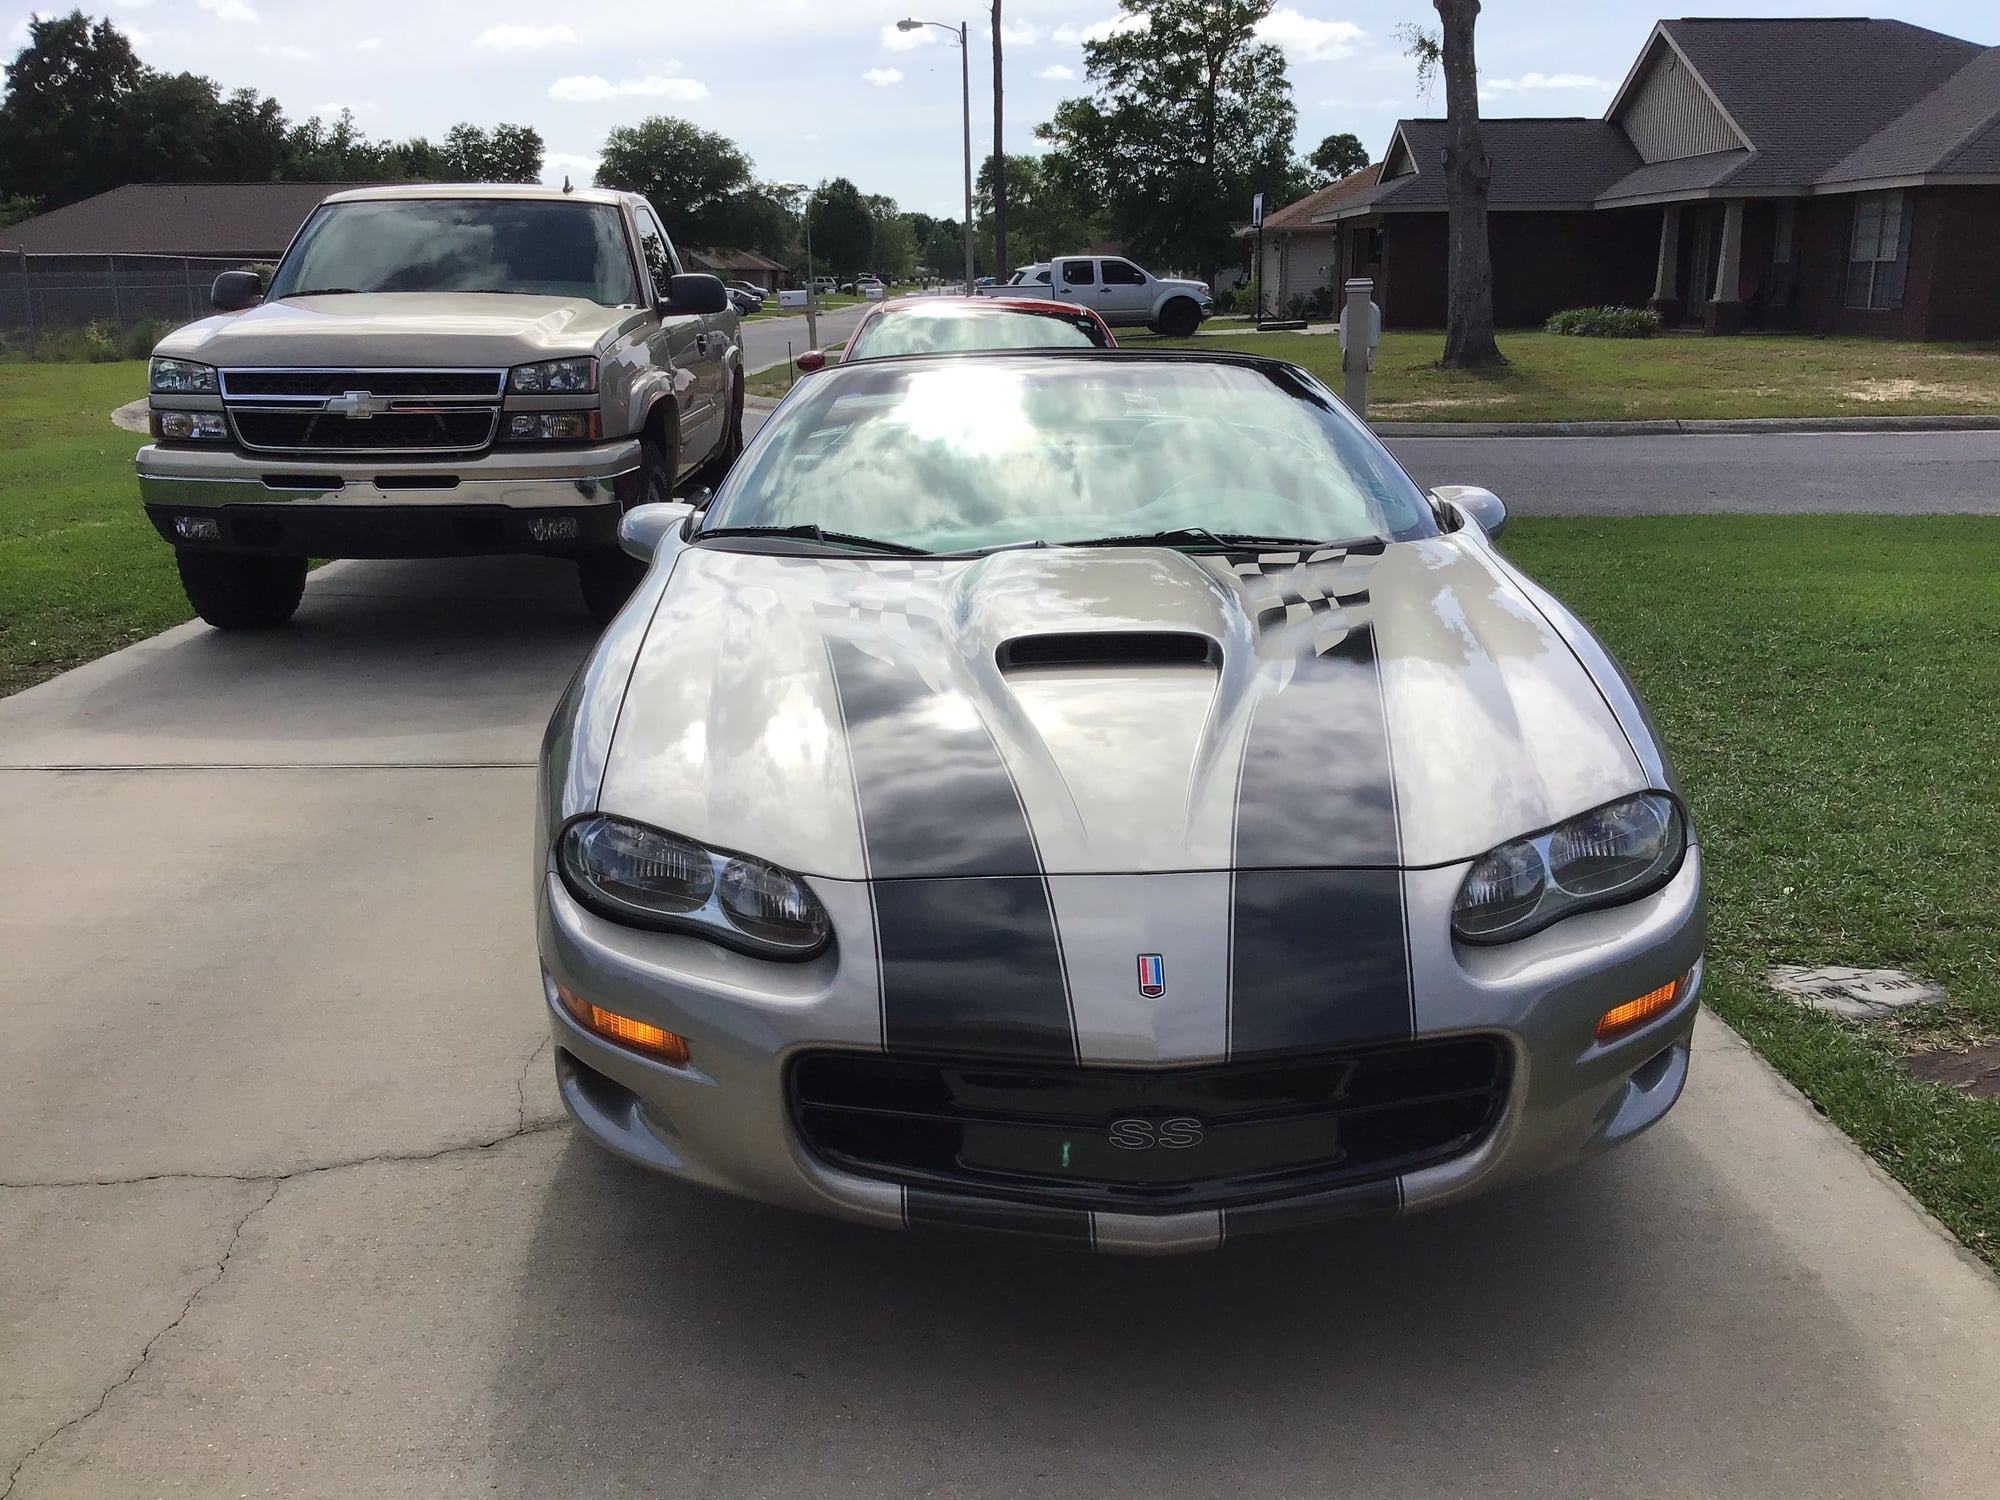 1999 Chevrolet Camaro - 1999 Camaro SS Convertible - Used - VIN 2G1FP32G4X2140040 - 43,202 Miles - 8 cyl - 2WD - Automatic - Coupe - Other - Milton, FL 32570, United States